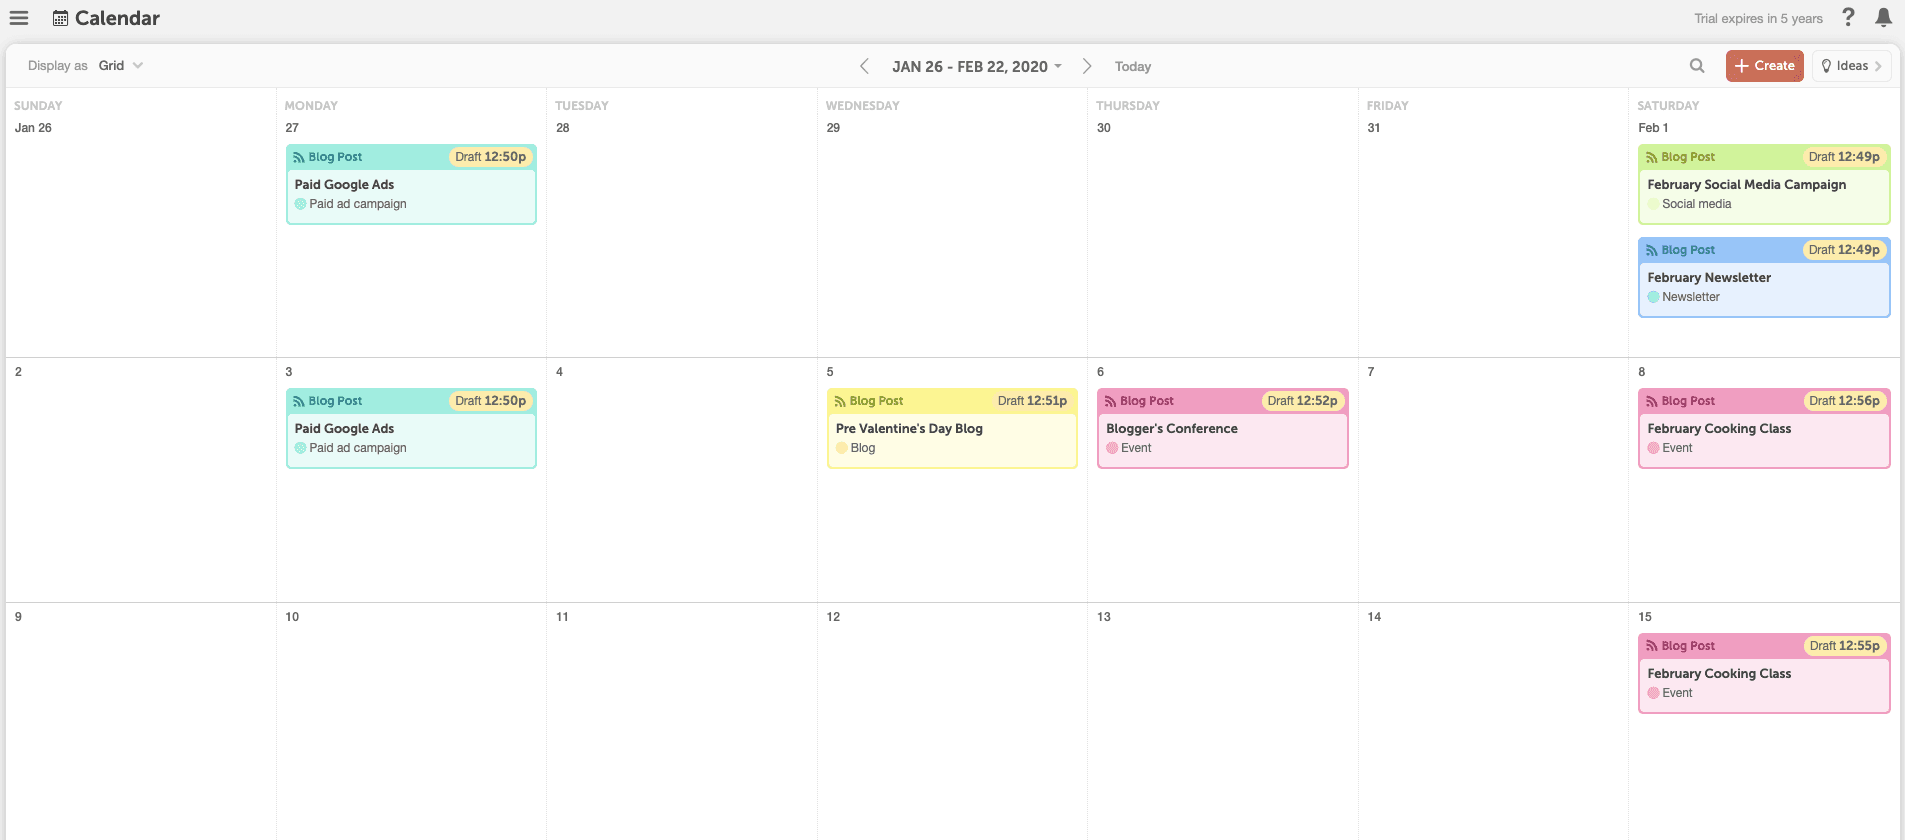 Calendar with Project Types